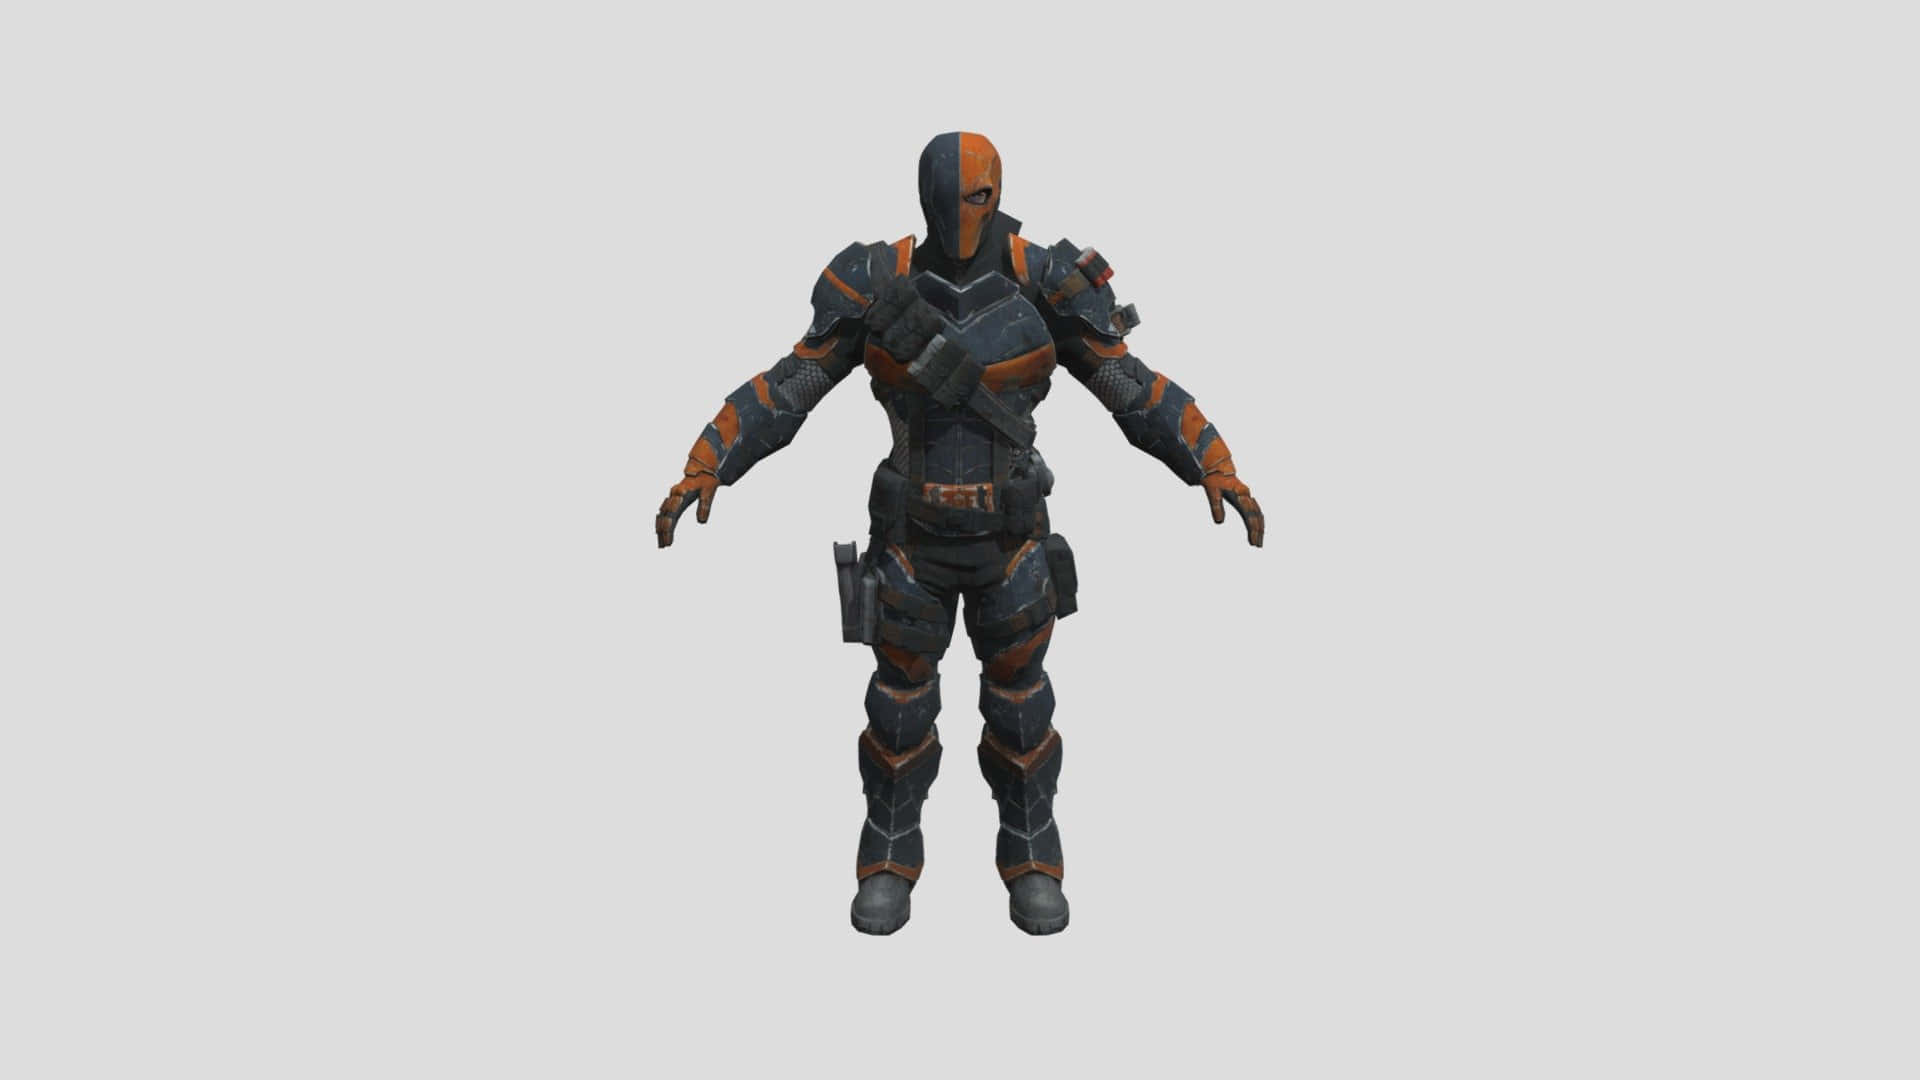 The deadliest assassin in all of DC Comics, Deathstroke